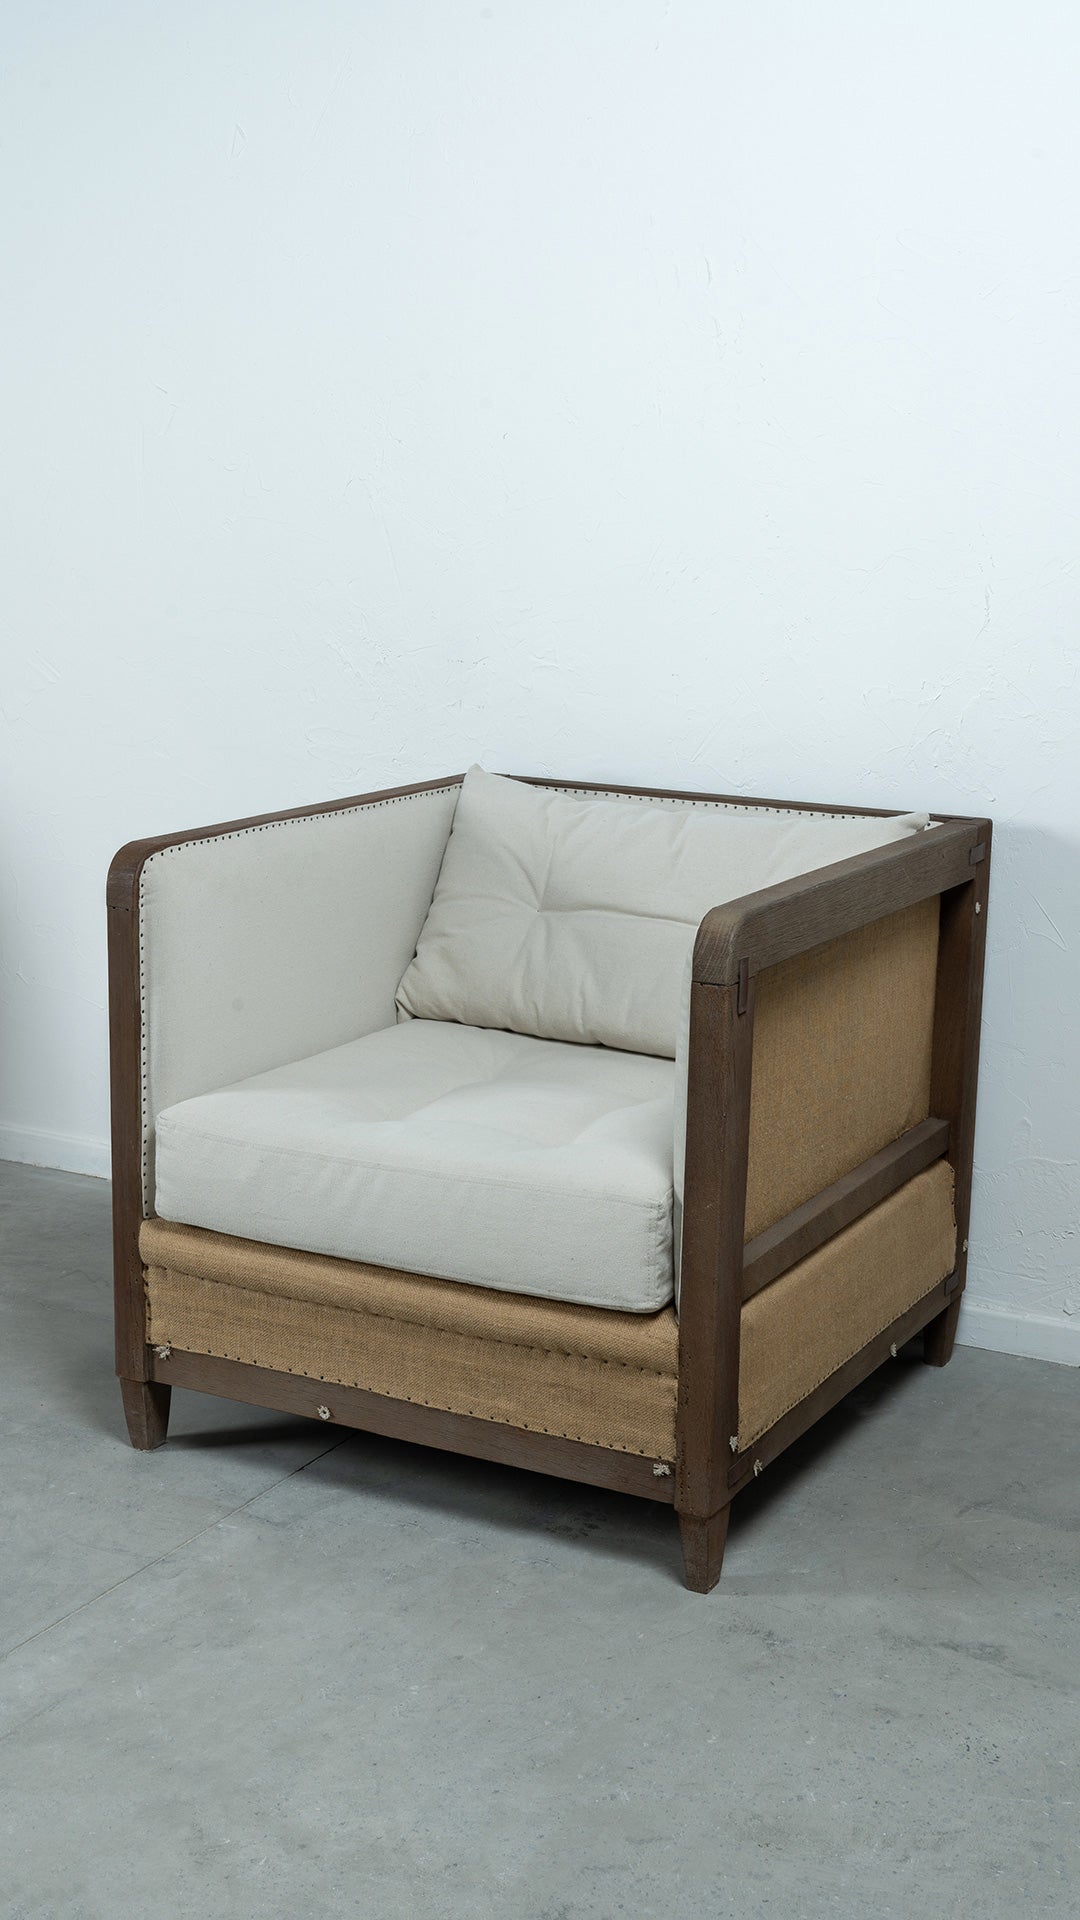 Deconstructed Arm Chair - Wood and Steel Furnitures